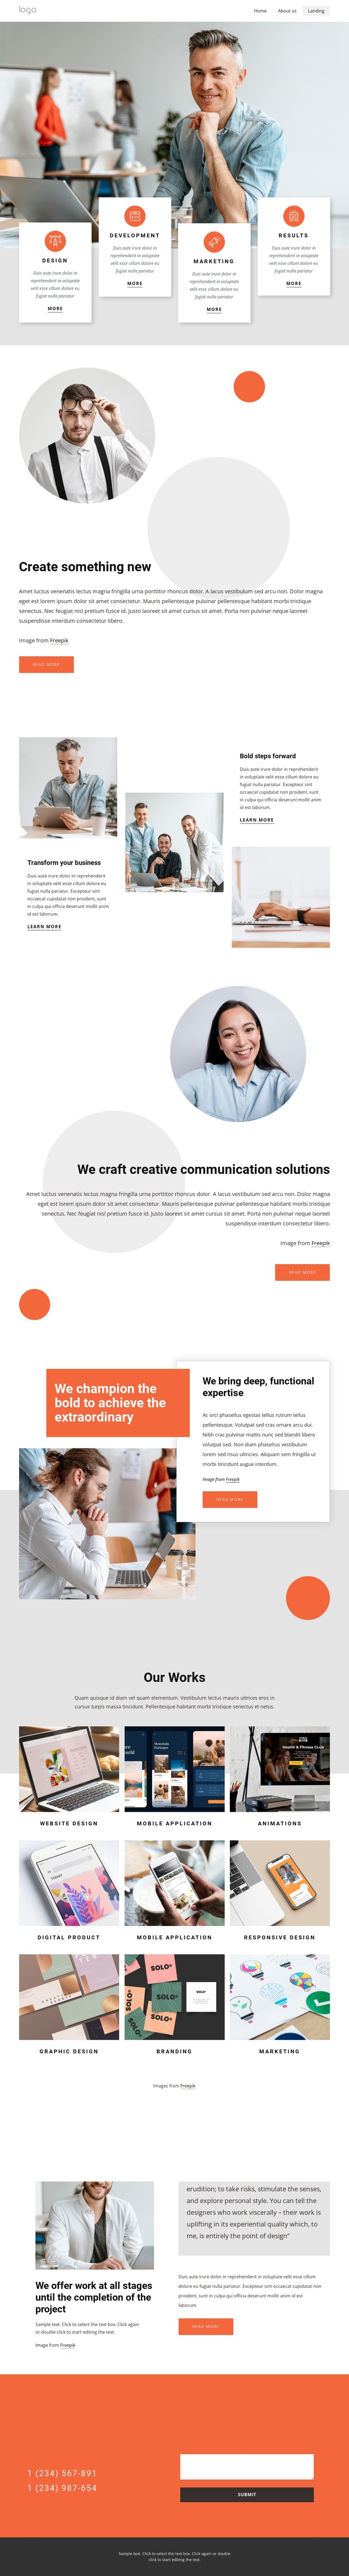 Crafting digital experiences: HTML5 Template